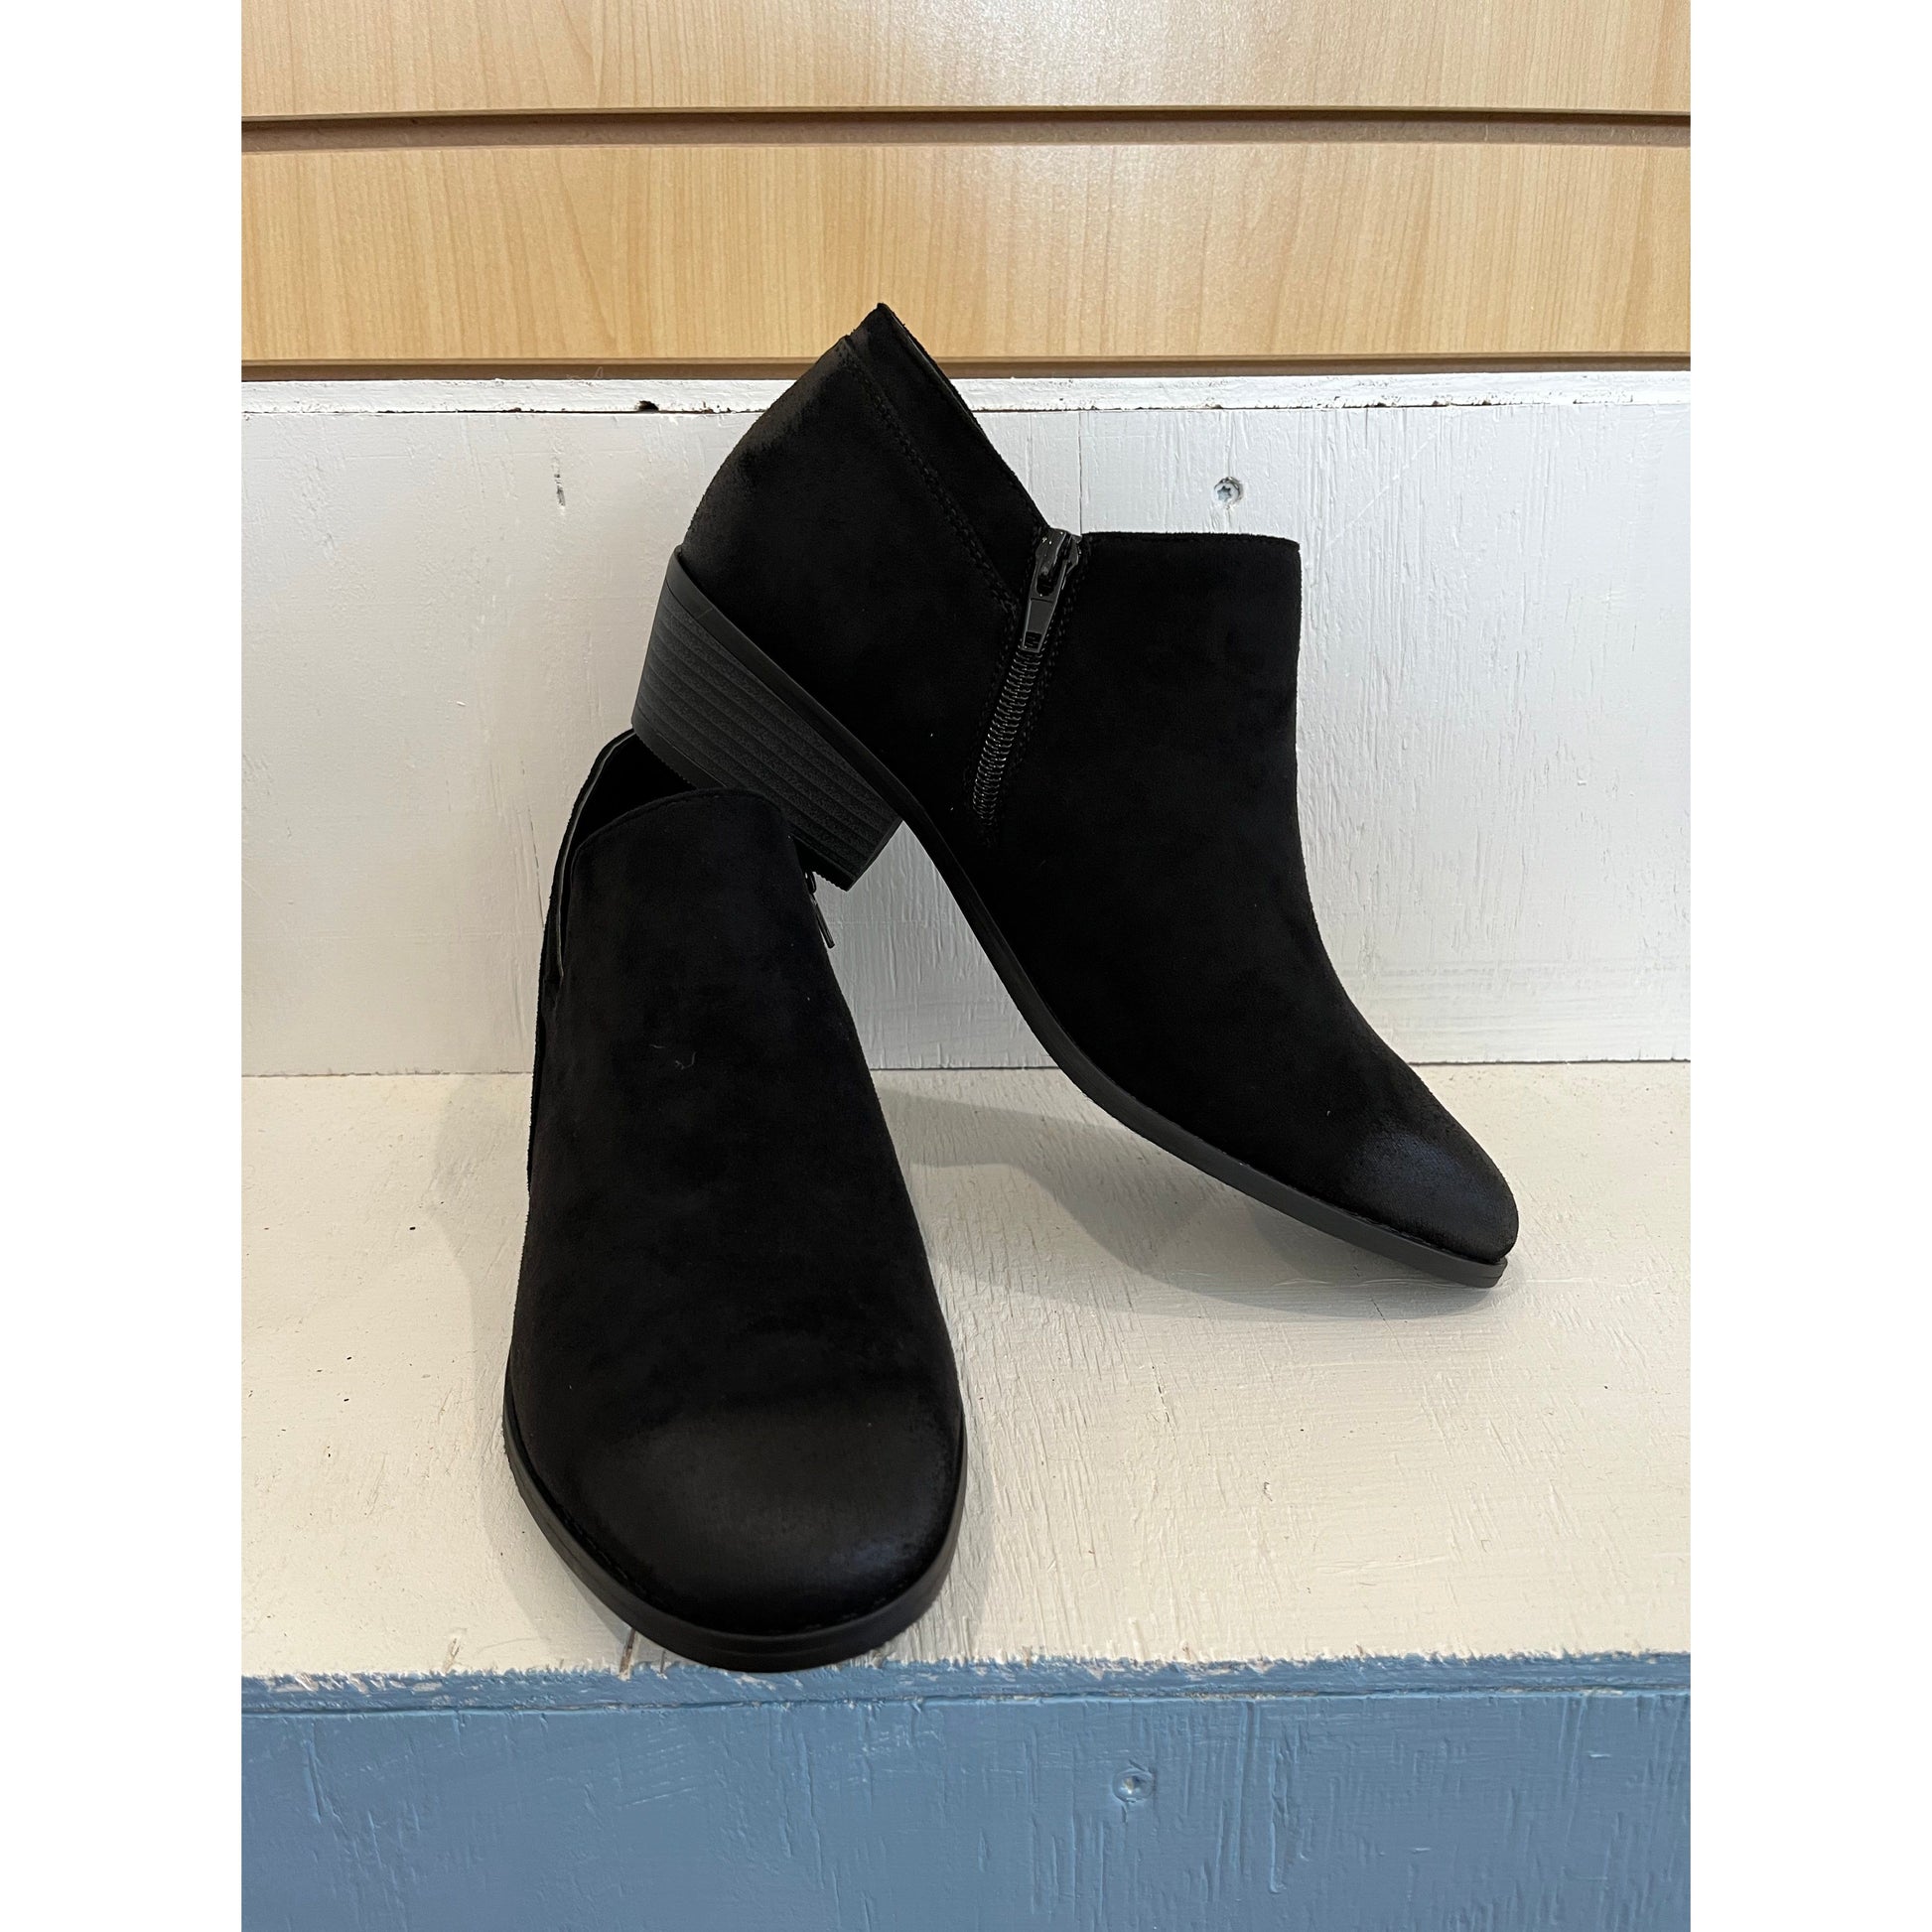 Zip up ankle bootie black or taupe